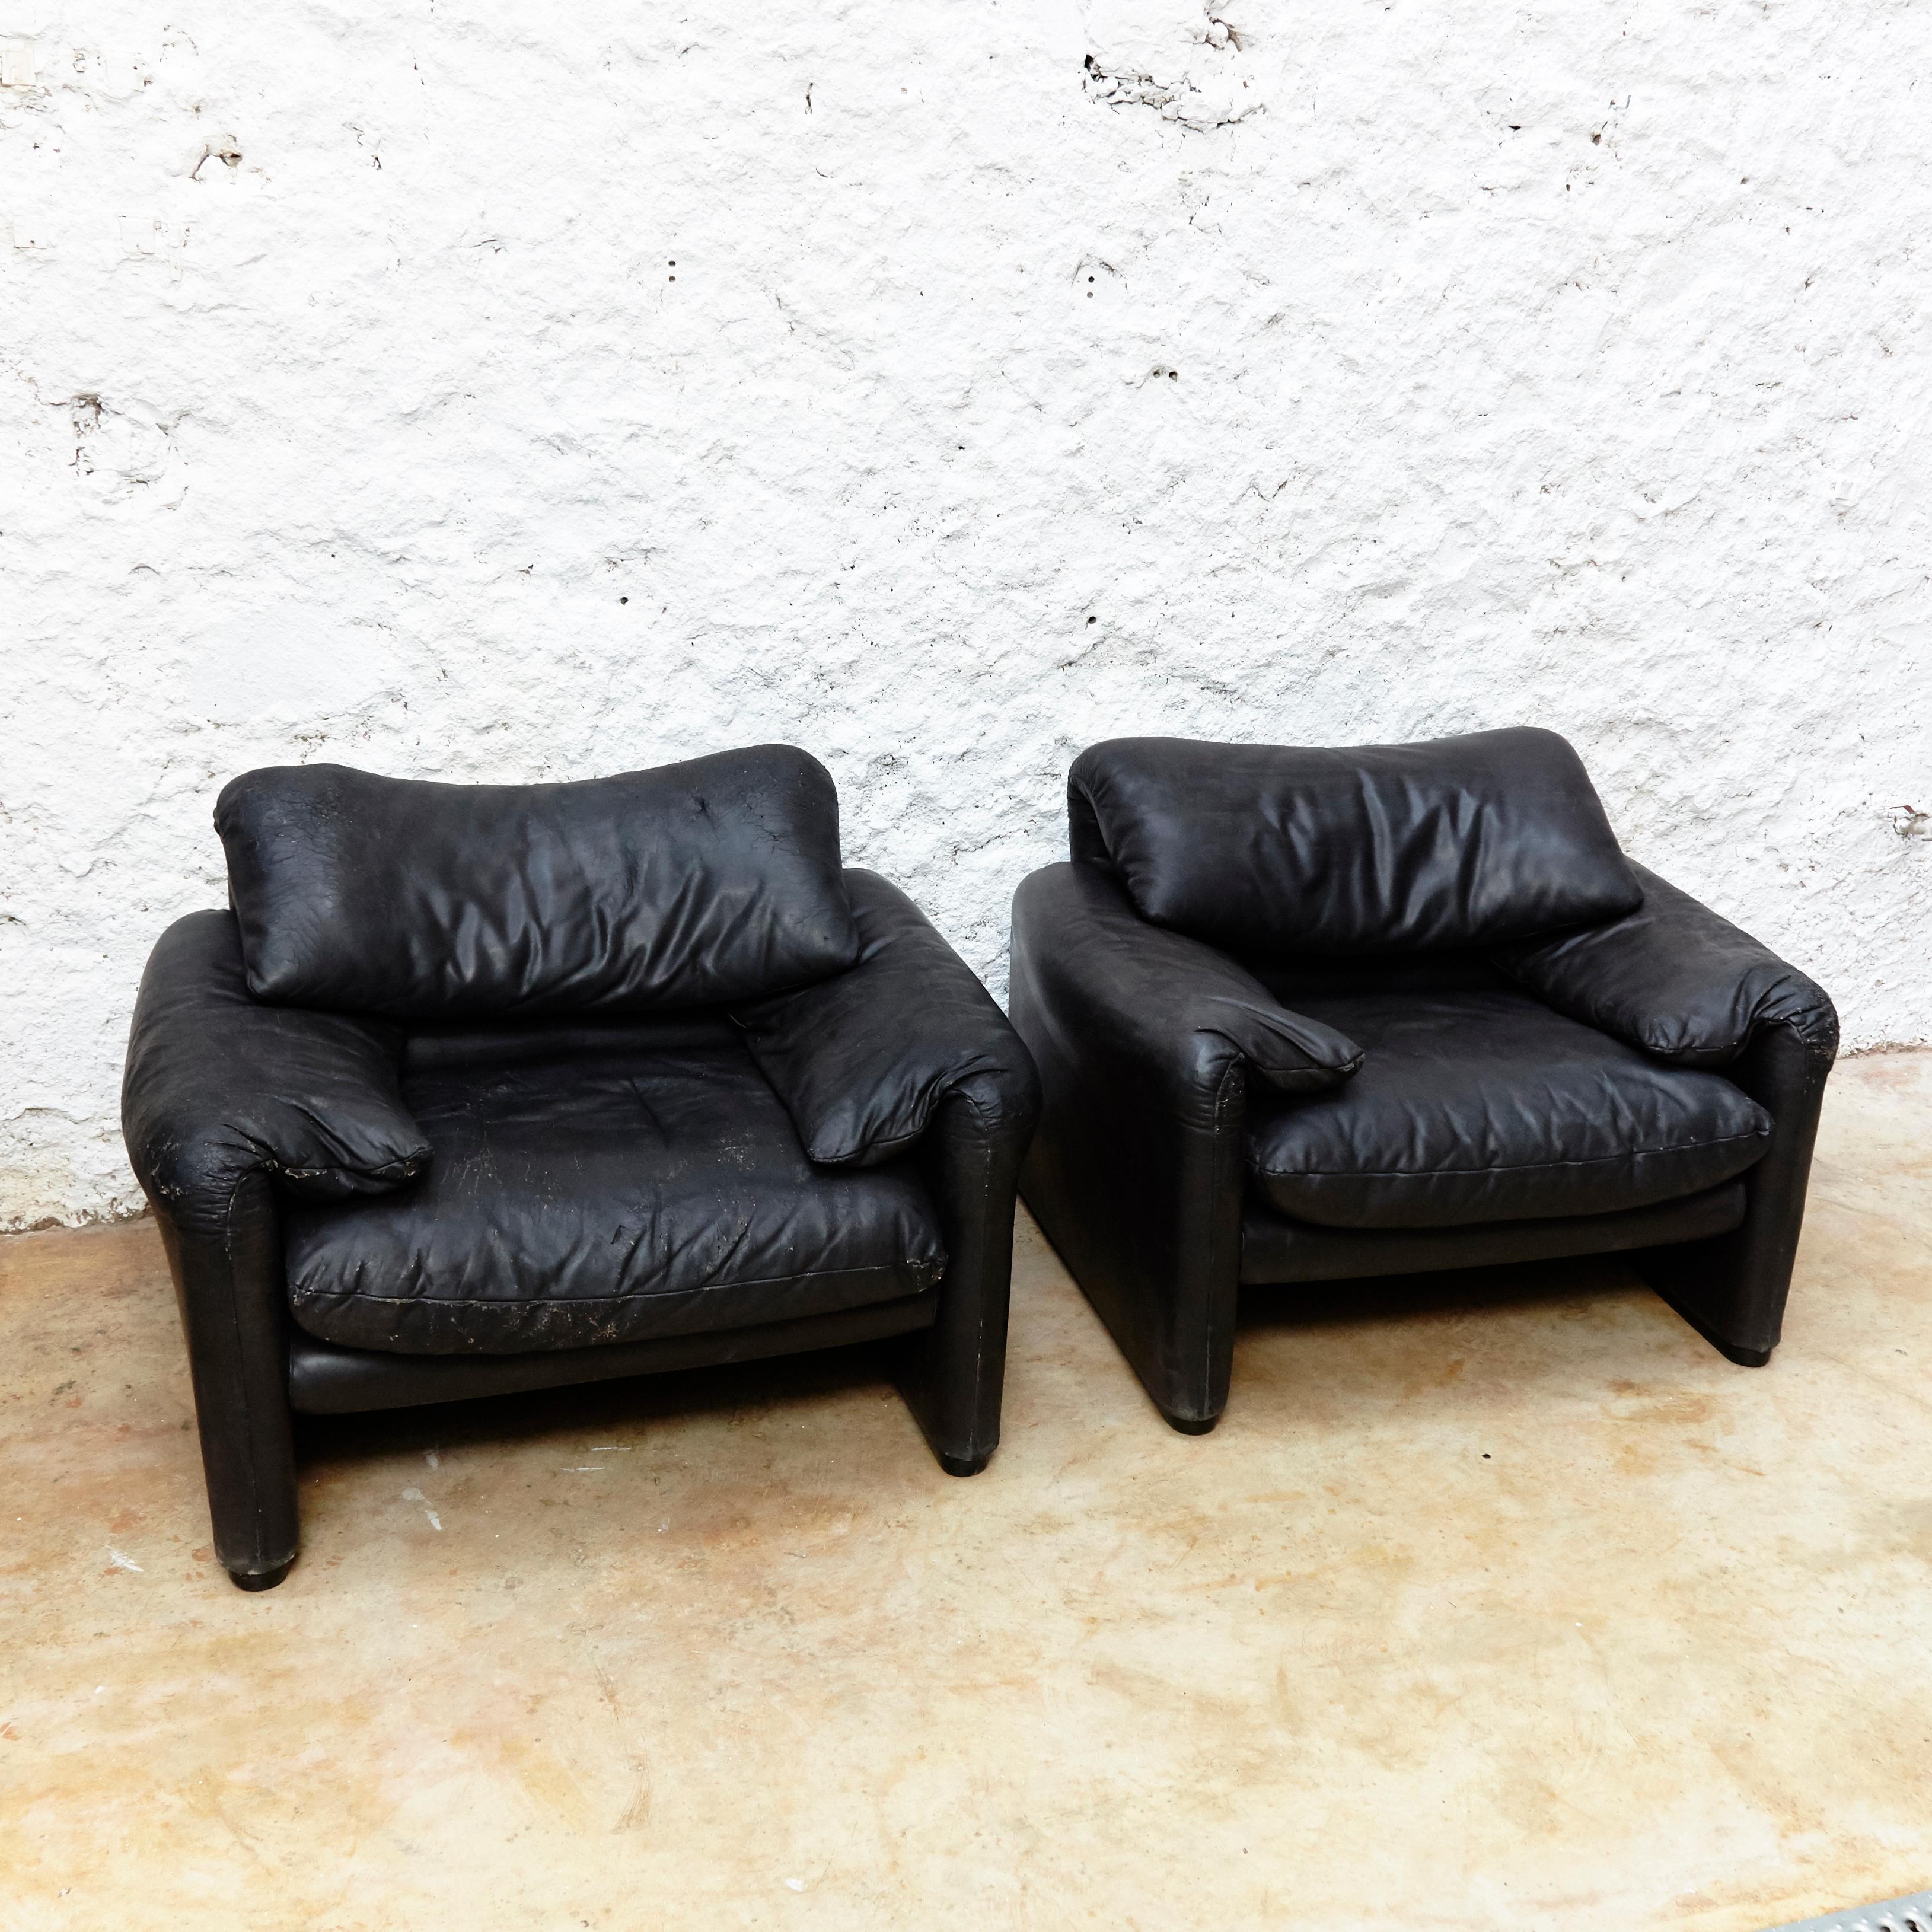 This easy chairs, model Maralunga, were designed by Vico Magistretti for Cassina during the 1960s.
It is upholstered in black and remains in a fair vintage condition, with wear consistent with age and use and some scratches and cracks as shown on